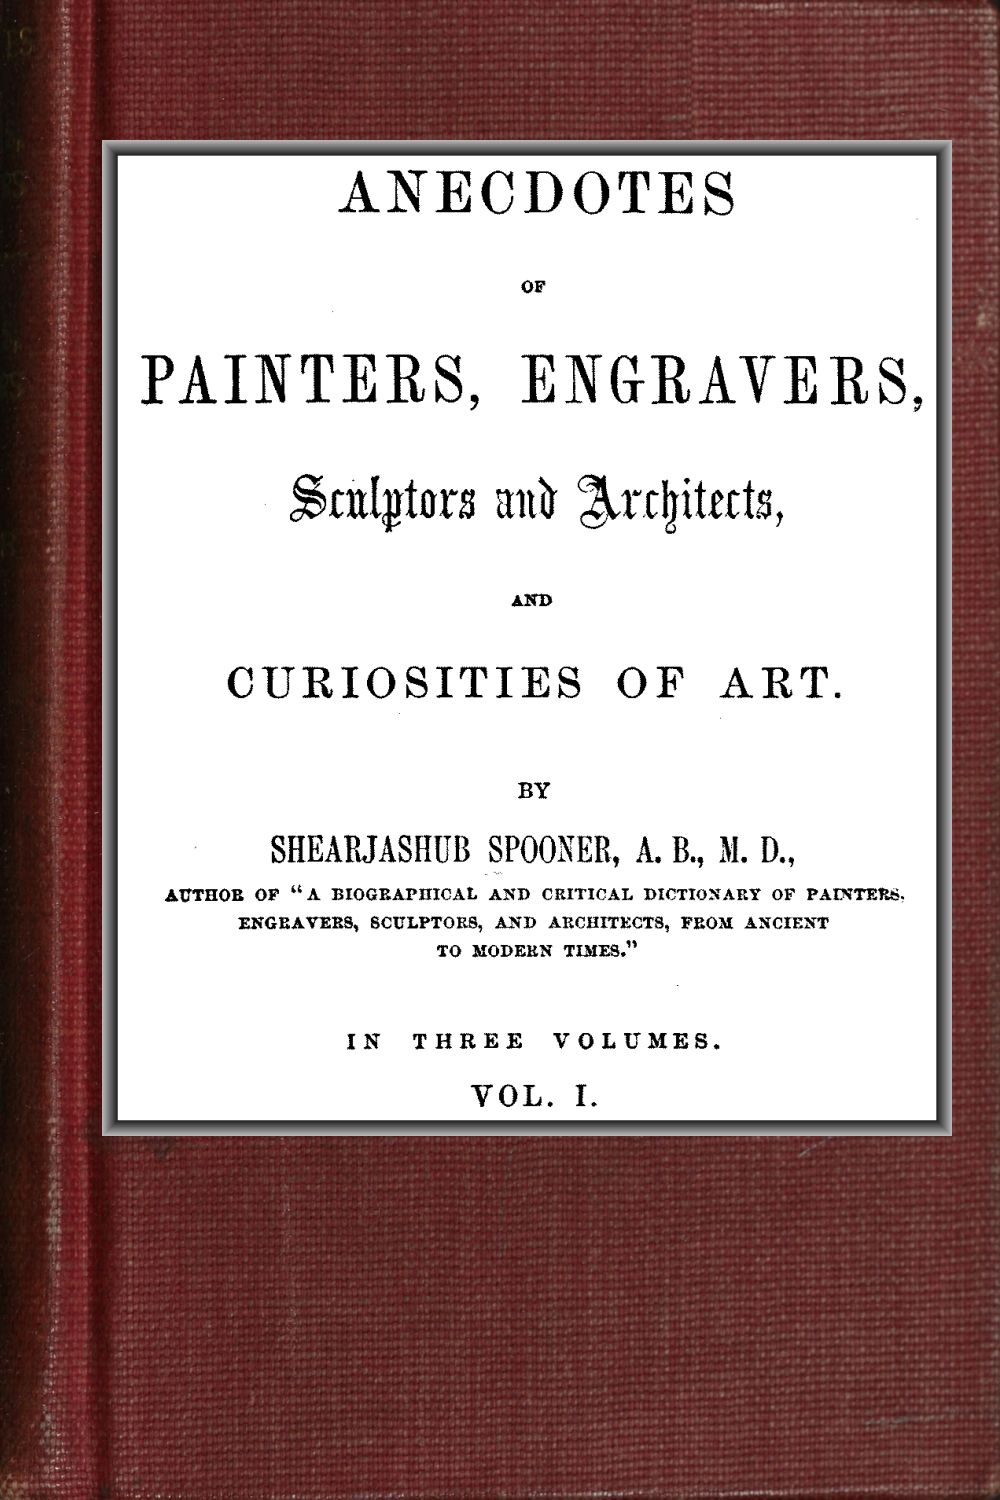 The Project Gutenberg eBook of Anecdotes of Painters, by Shearjashub Spooner.